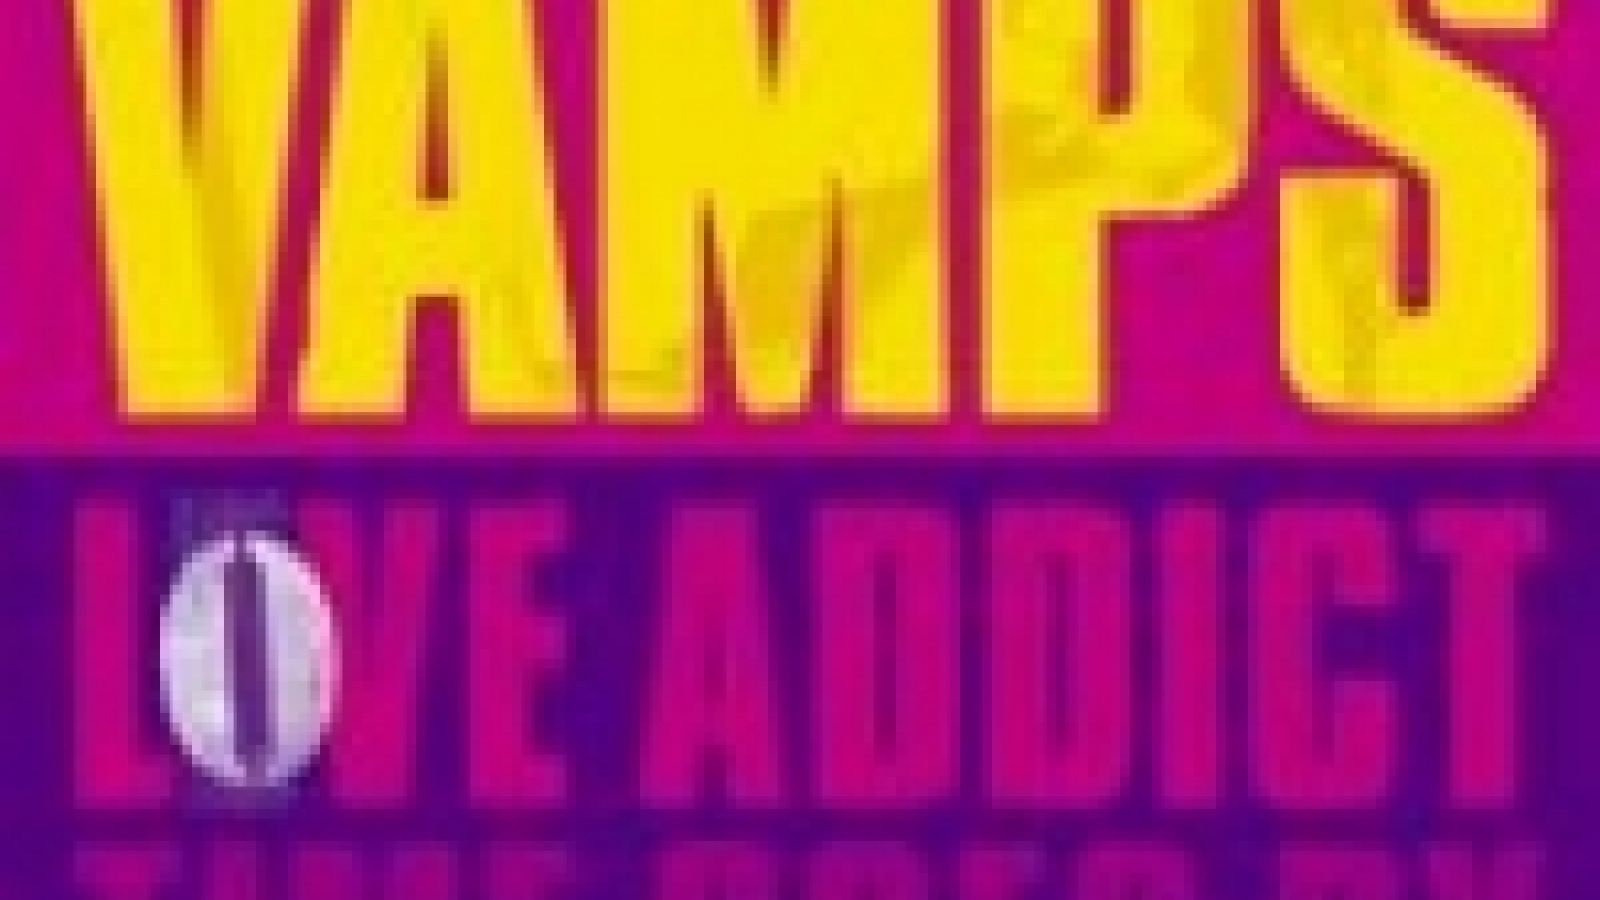 VAMPS - LOVE ADDICT © 2008 Zy.connection Inc. All Rights Reserved.